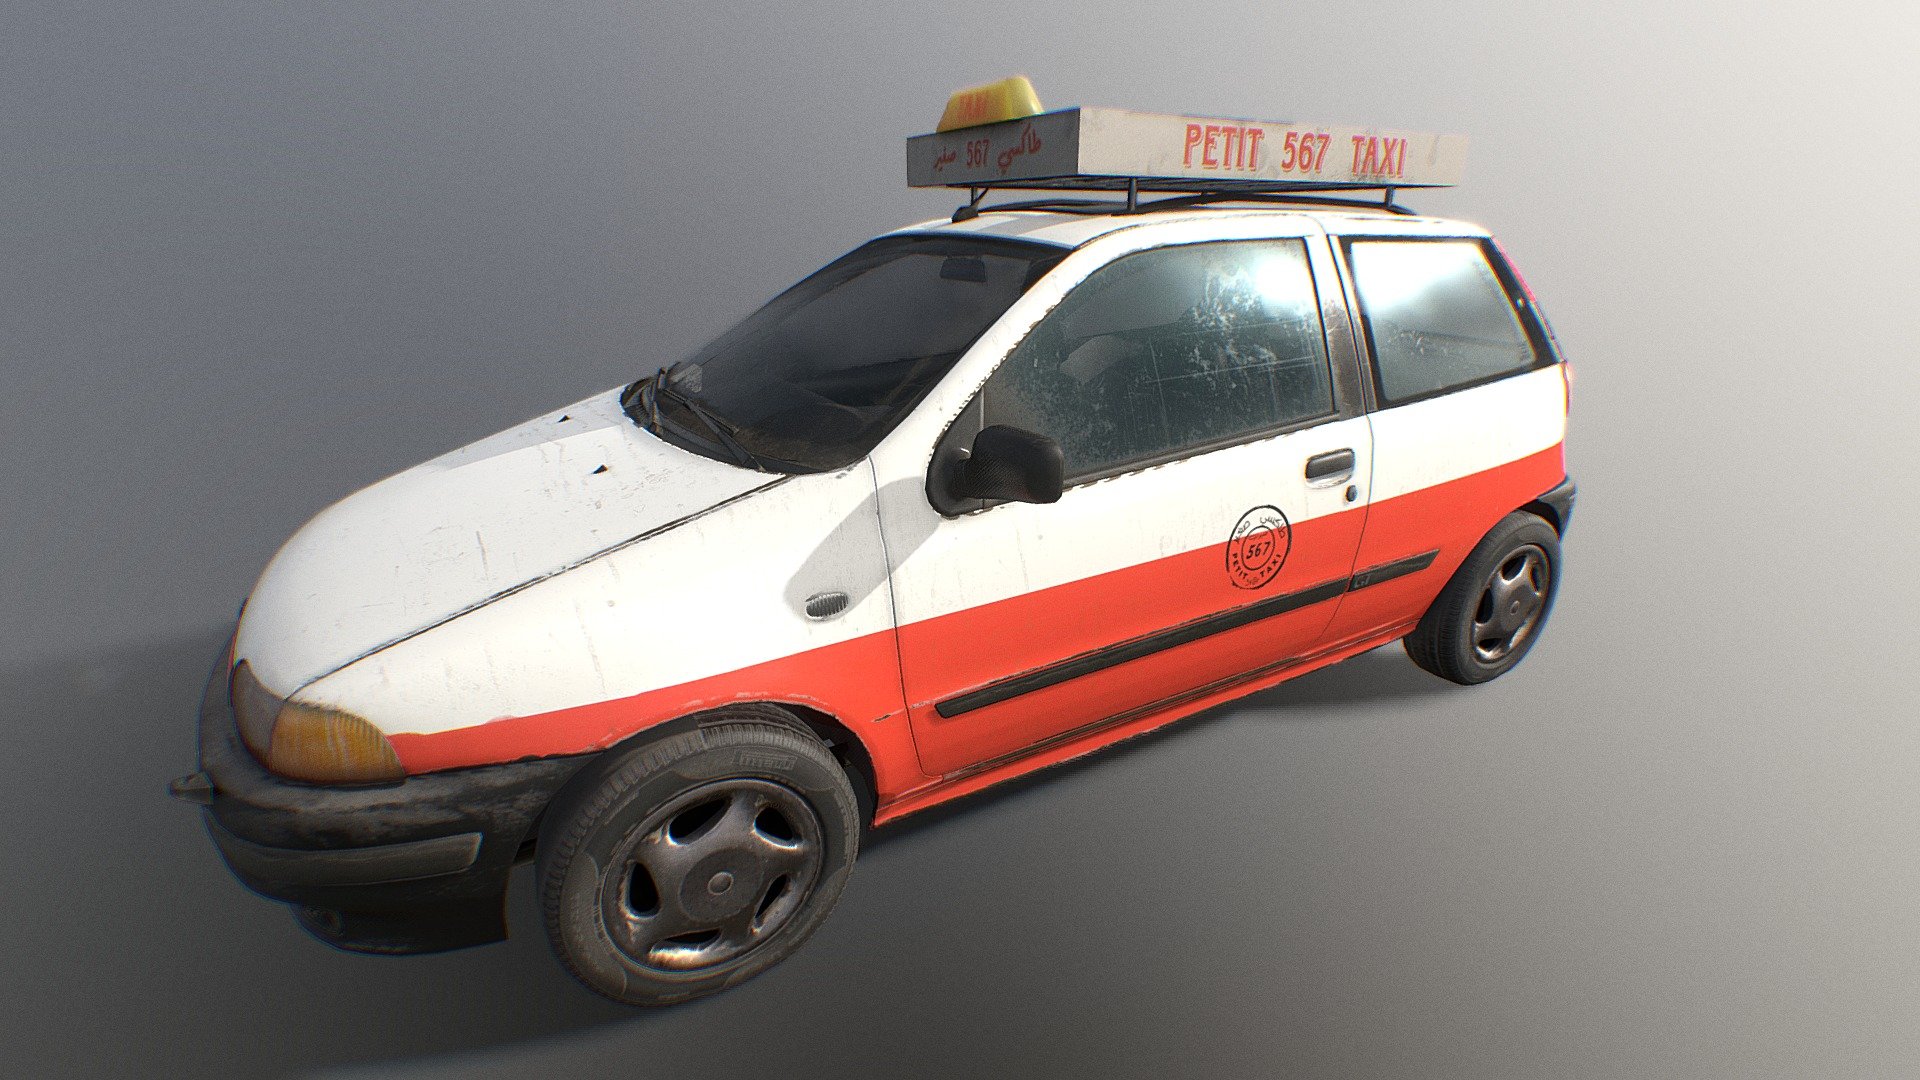 Stunningly Realistic and Highly Detailed 3D FBX Model Ready for Your Projects

(HIGH-QUALITY) PBR Textures created in Blender &amp; Substence Painter

you can support me by folowing me on instagram
my ig: HichamSvr

For  DW : https://artstn.co/m/d551x









 - Taxi Morocco Laâyoune 1995-fiat-punto-gt - 3D model by HichamSvr 3d model